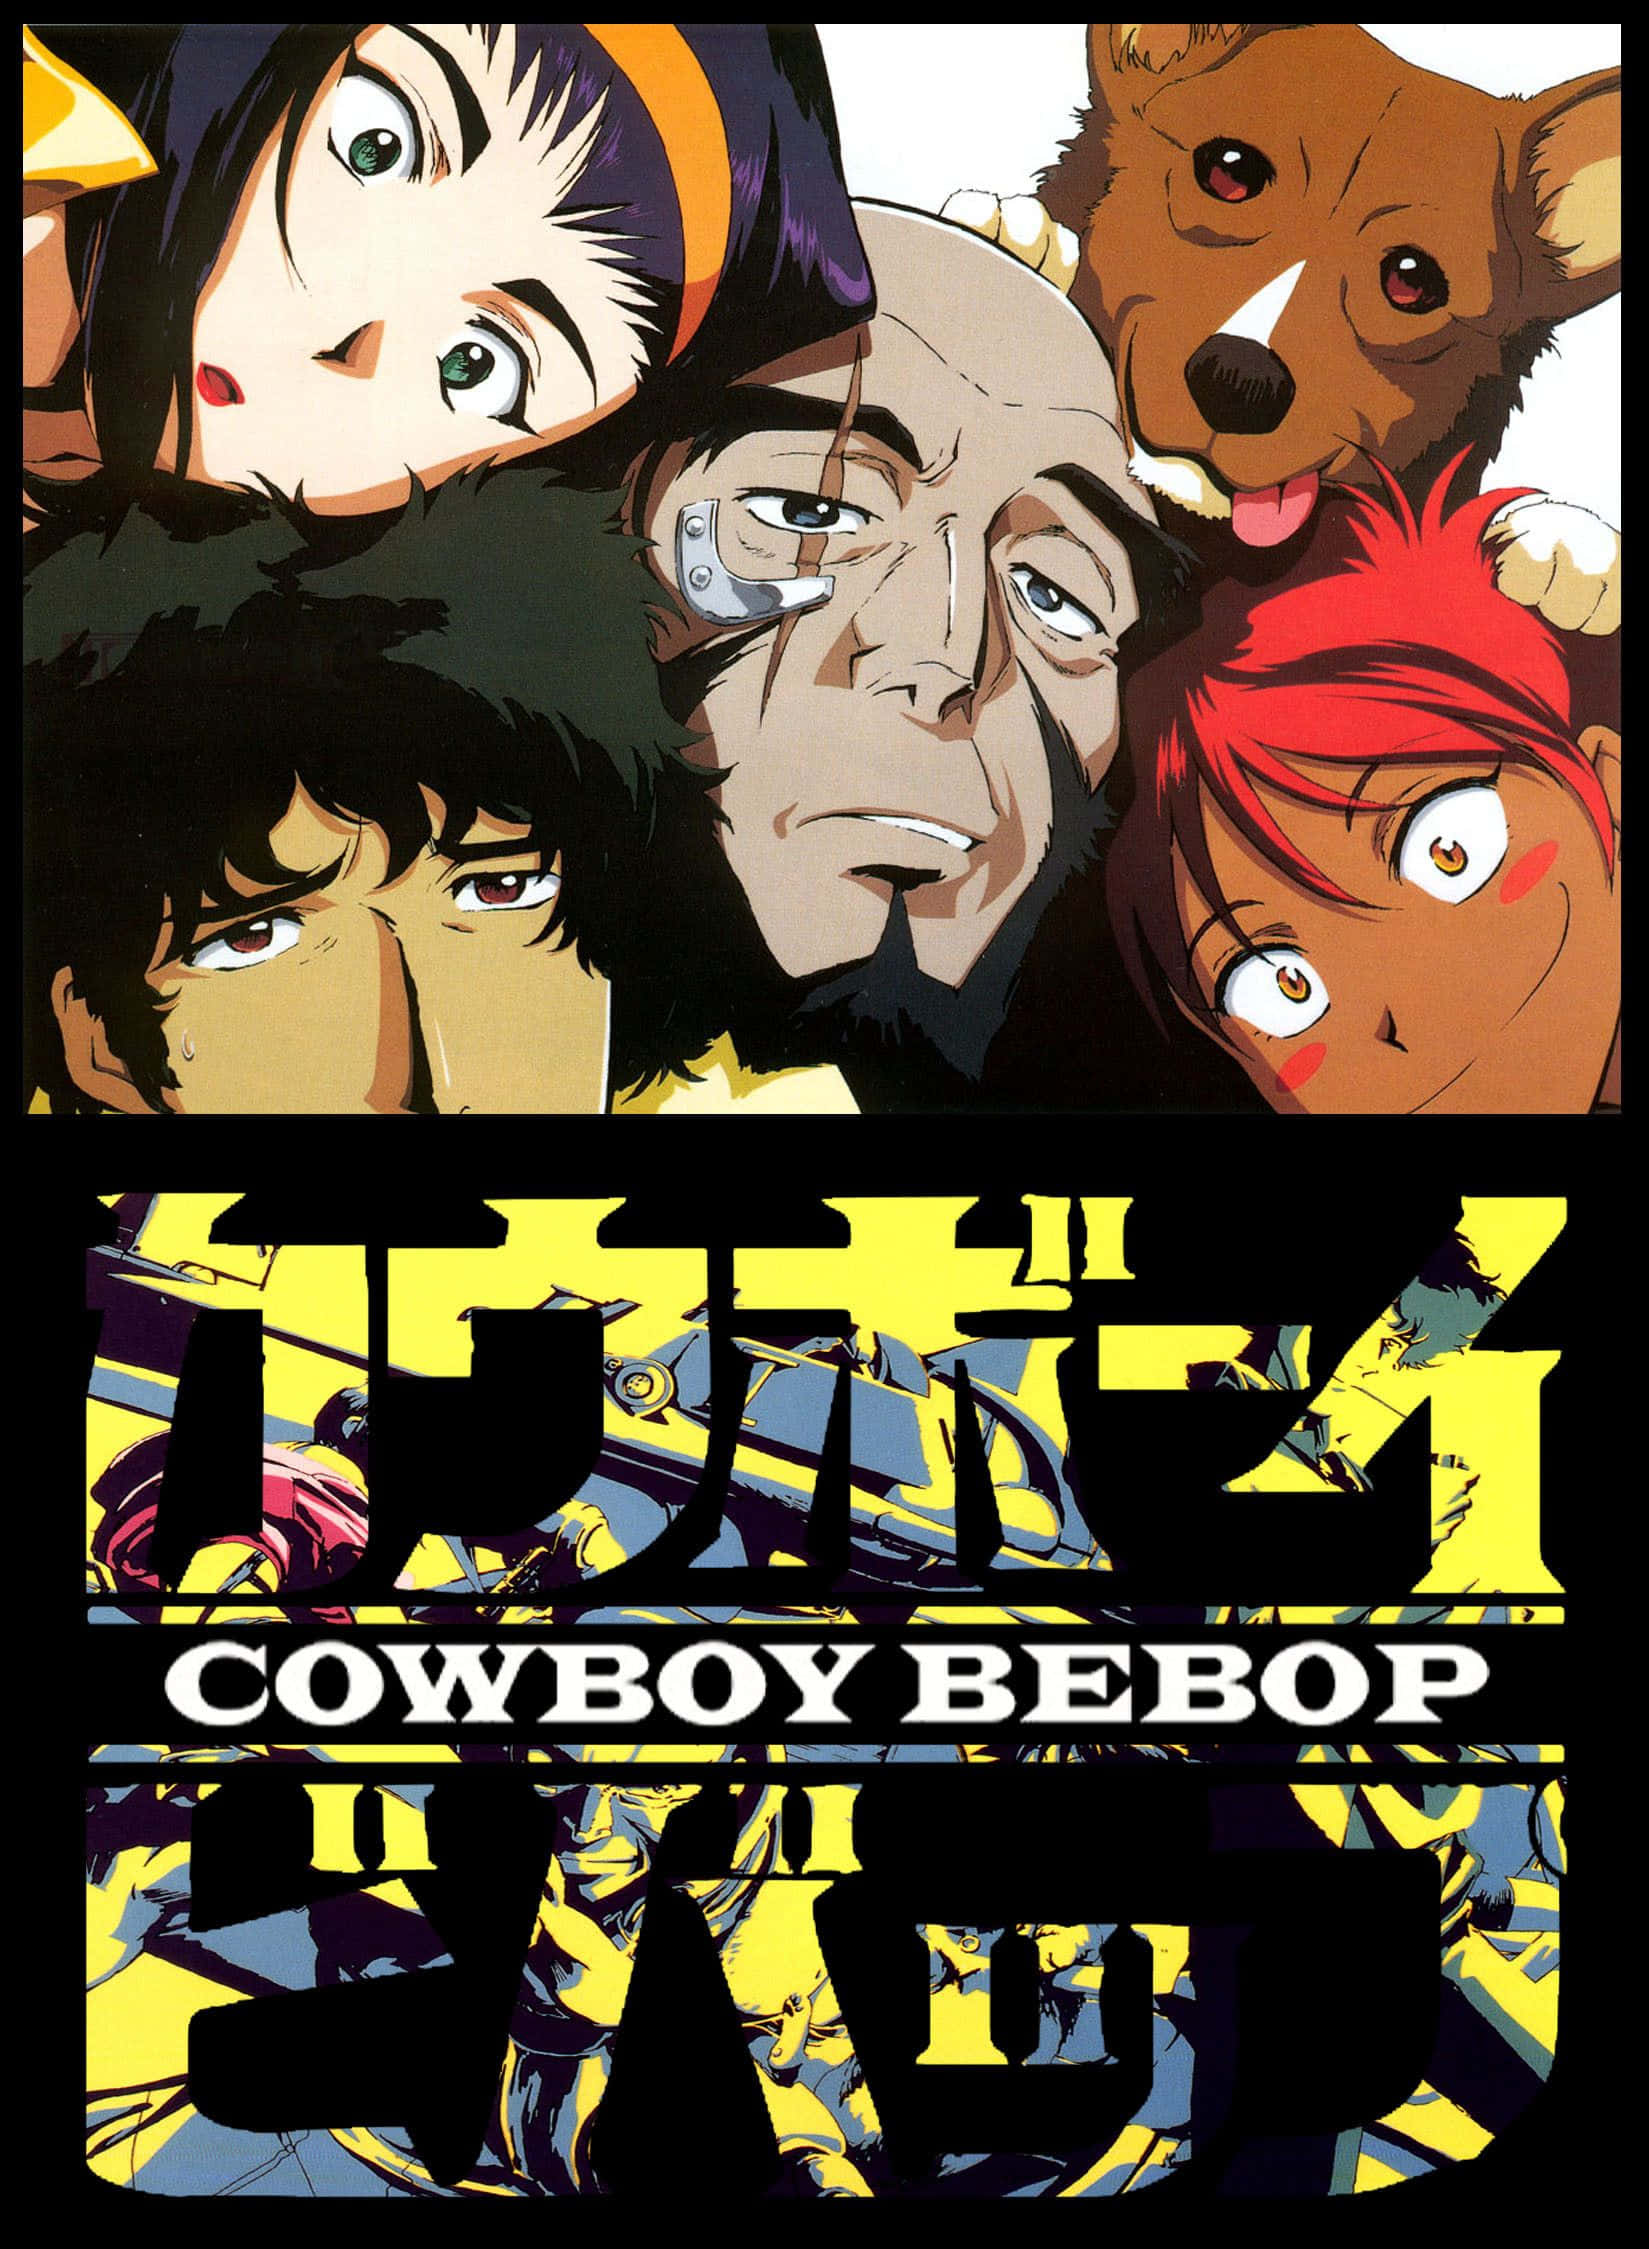 A Cowboy Bebop Iphone with a clean and sleek design Wallpaper